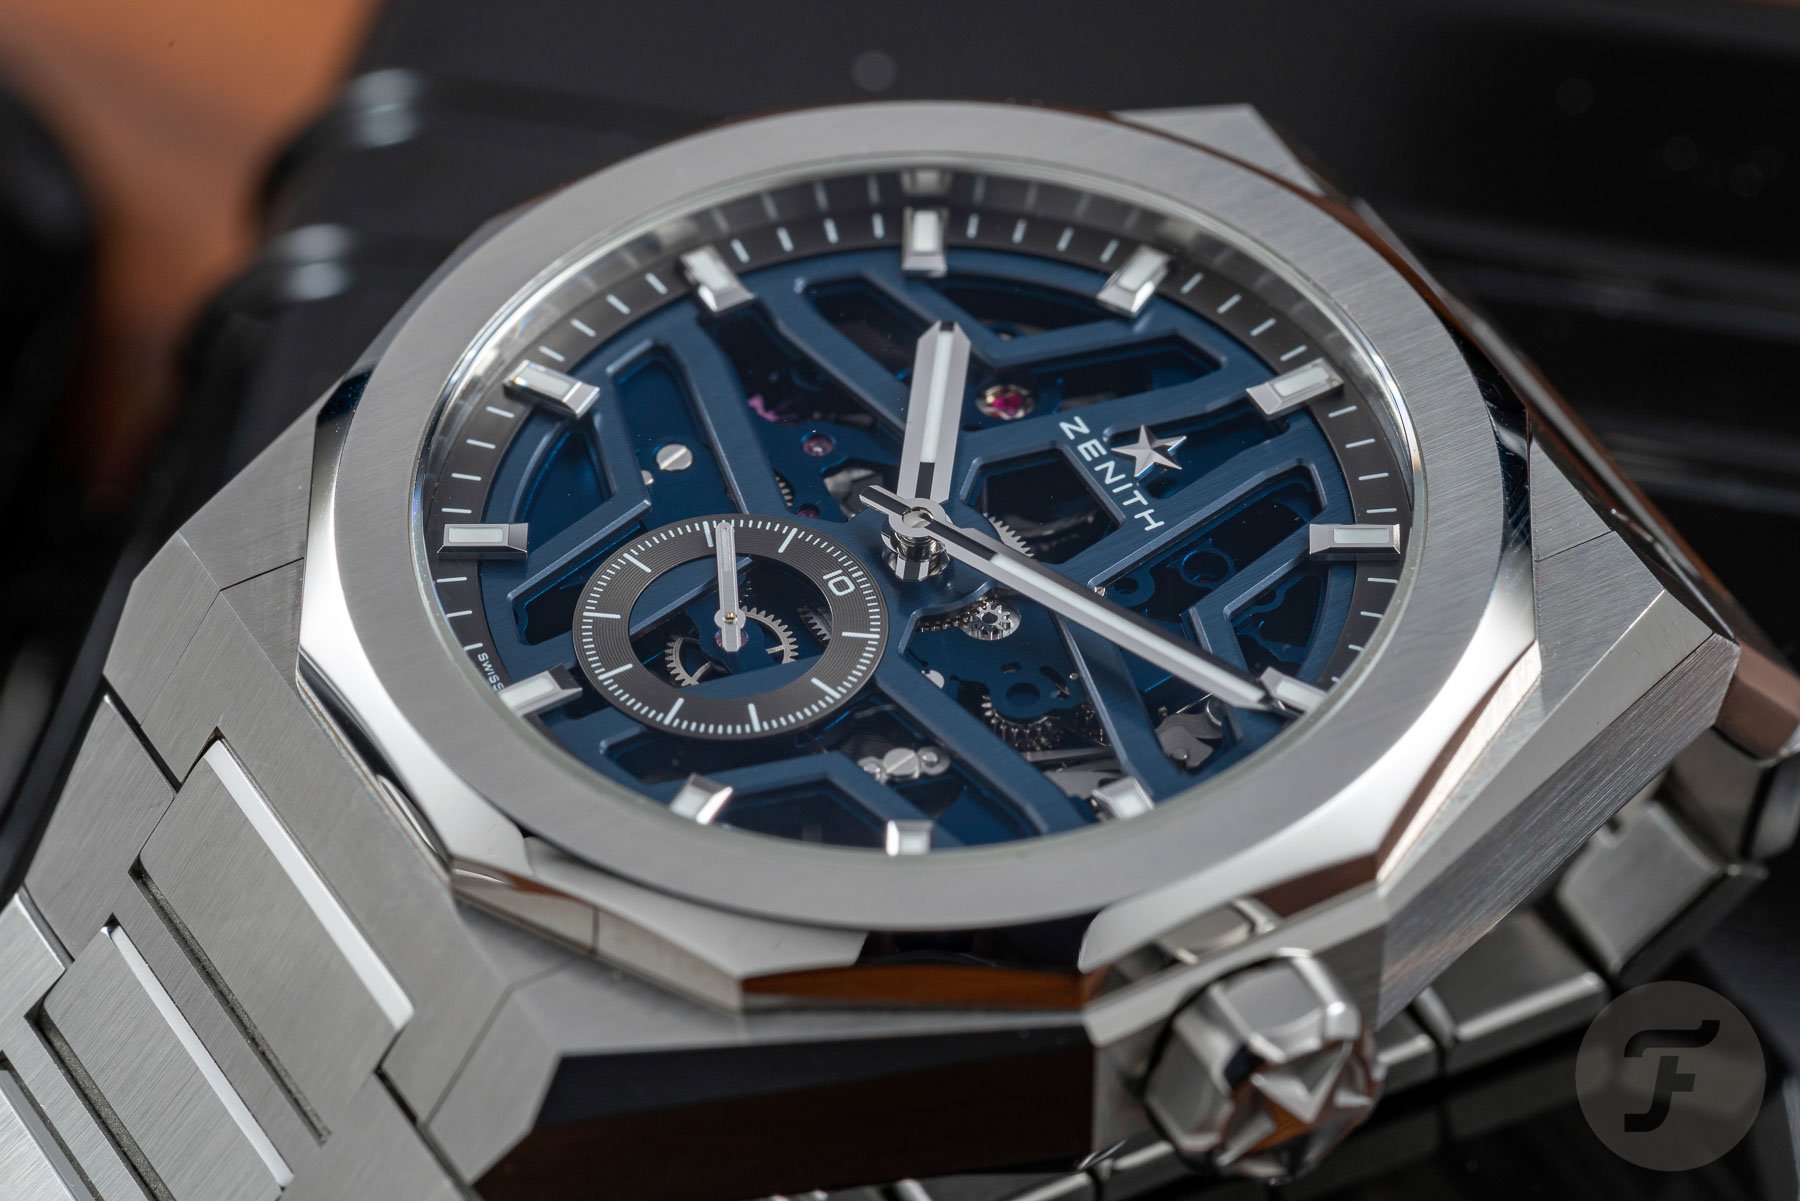 We asked you if the Zenith Defy was underrated, and this is what you said